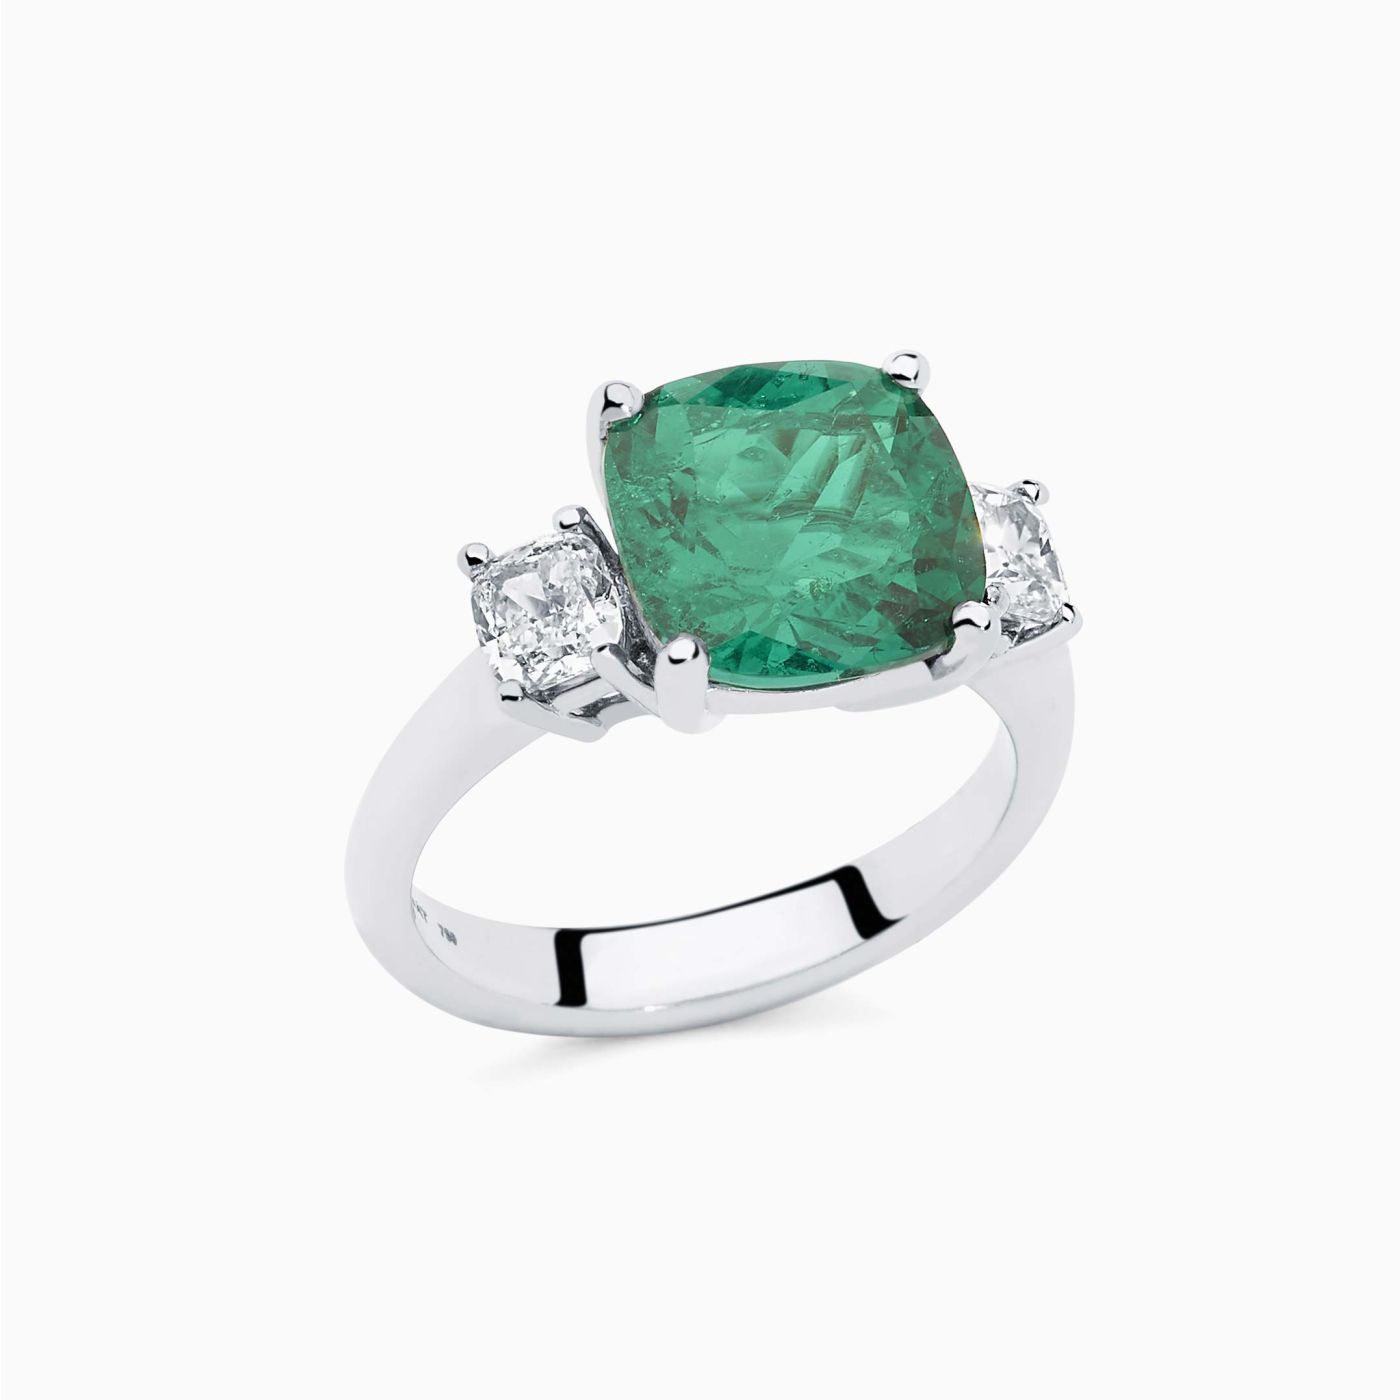 White gold with emerald in the center solitaire ring